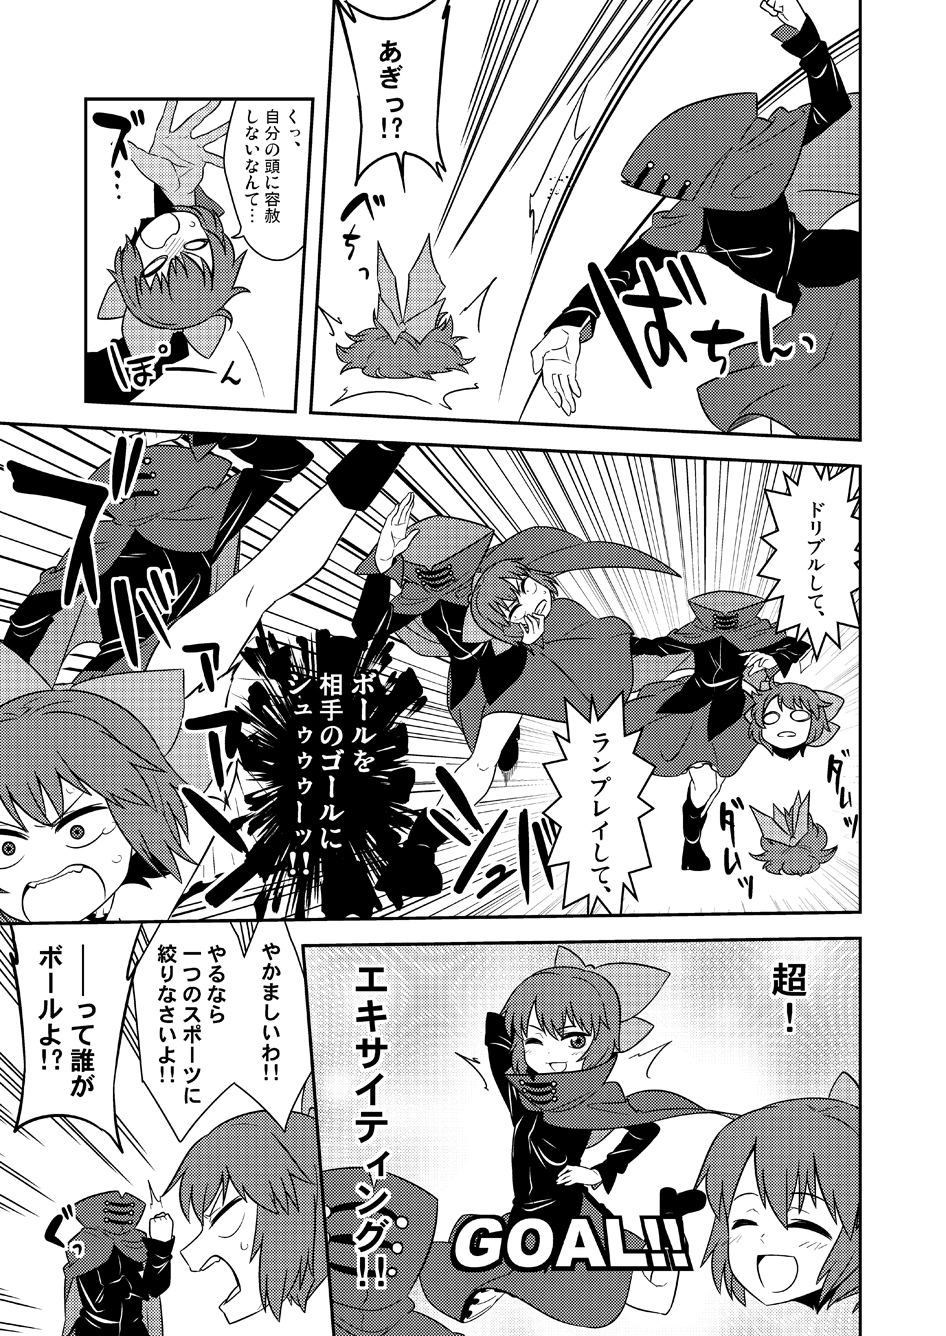 1girl basketball bow cape closed_eyes comic dribbling football hair_bow highres jeno kicking monochrome open_mouth posing sekibanki severed_head shirt skirt smile soccer solo throwing touhou translation_request